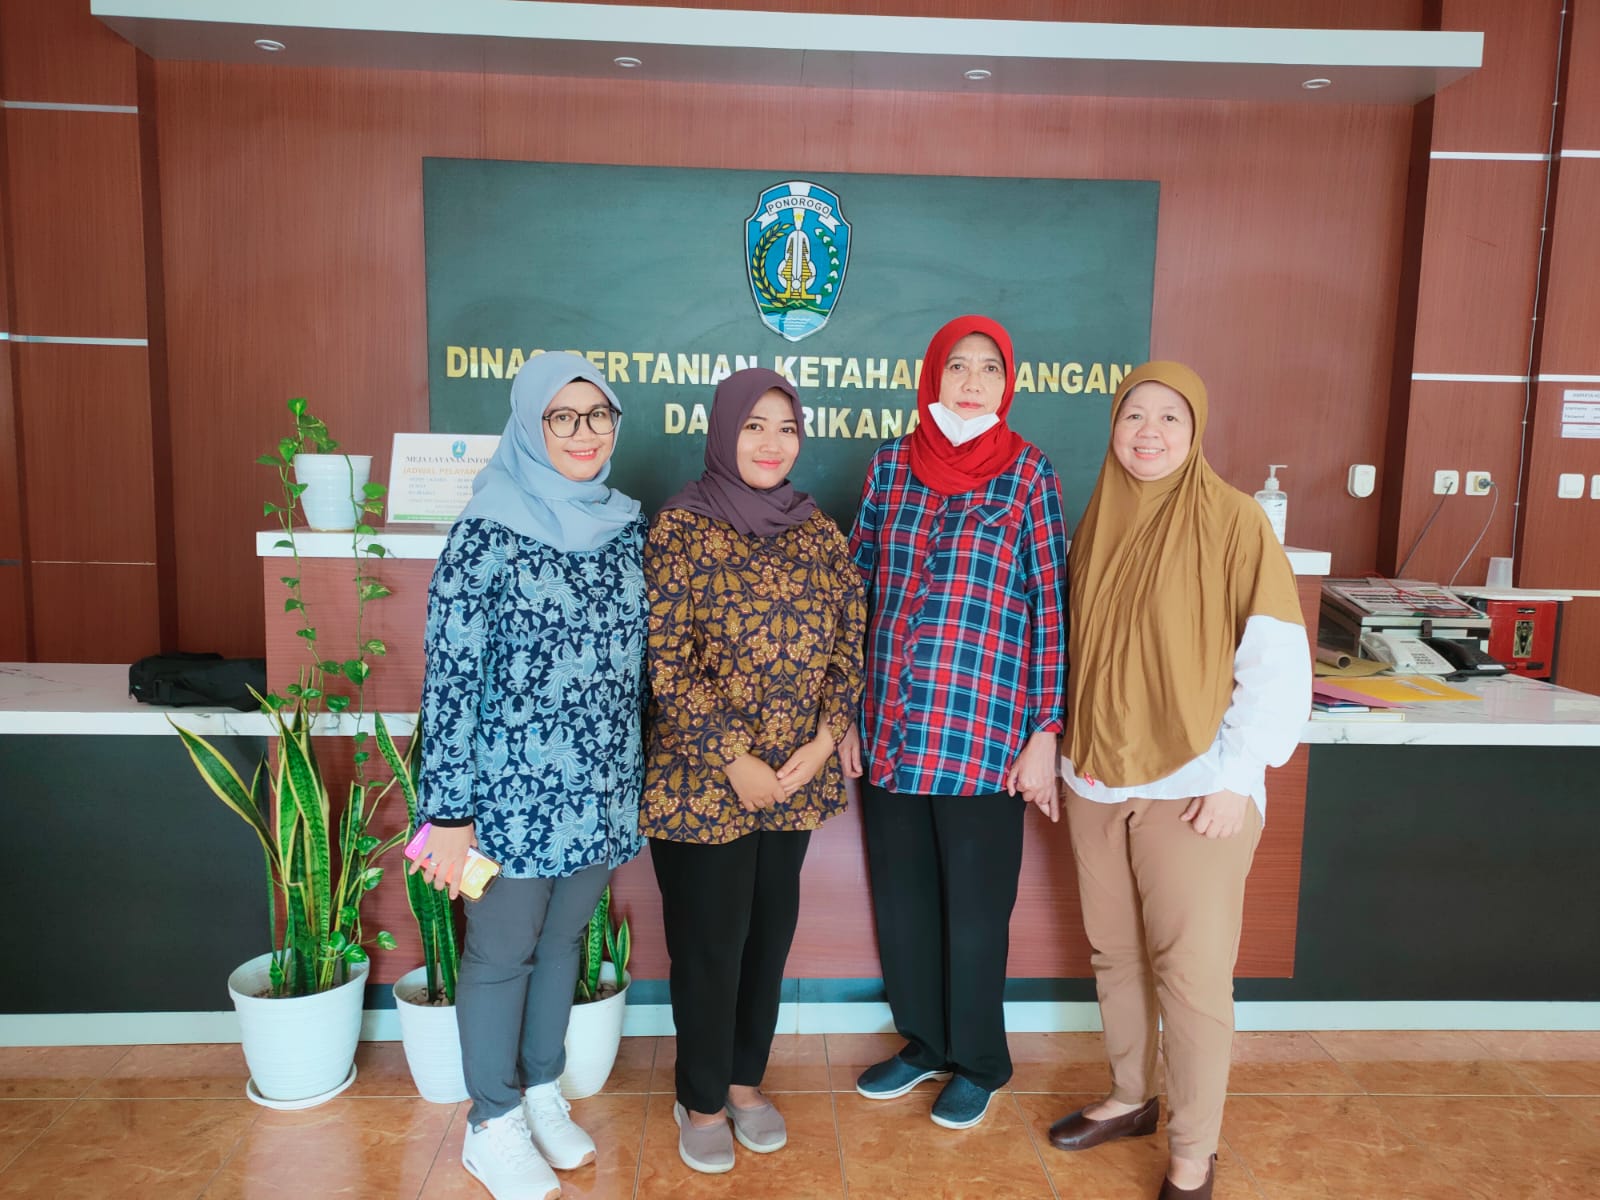 Overcoming Problems with Breeders, UB Faculty of Animal Science Lecturers Collaborate with the Department of Agriculture, Food Security, and Fisheries of Ponorogo Regency